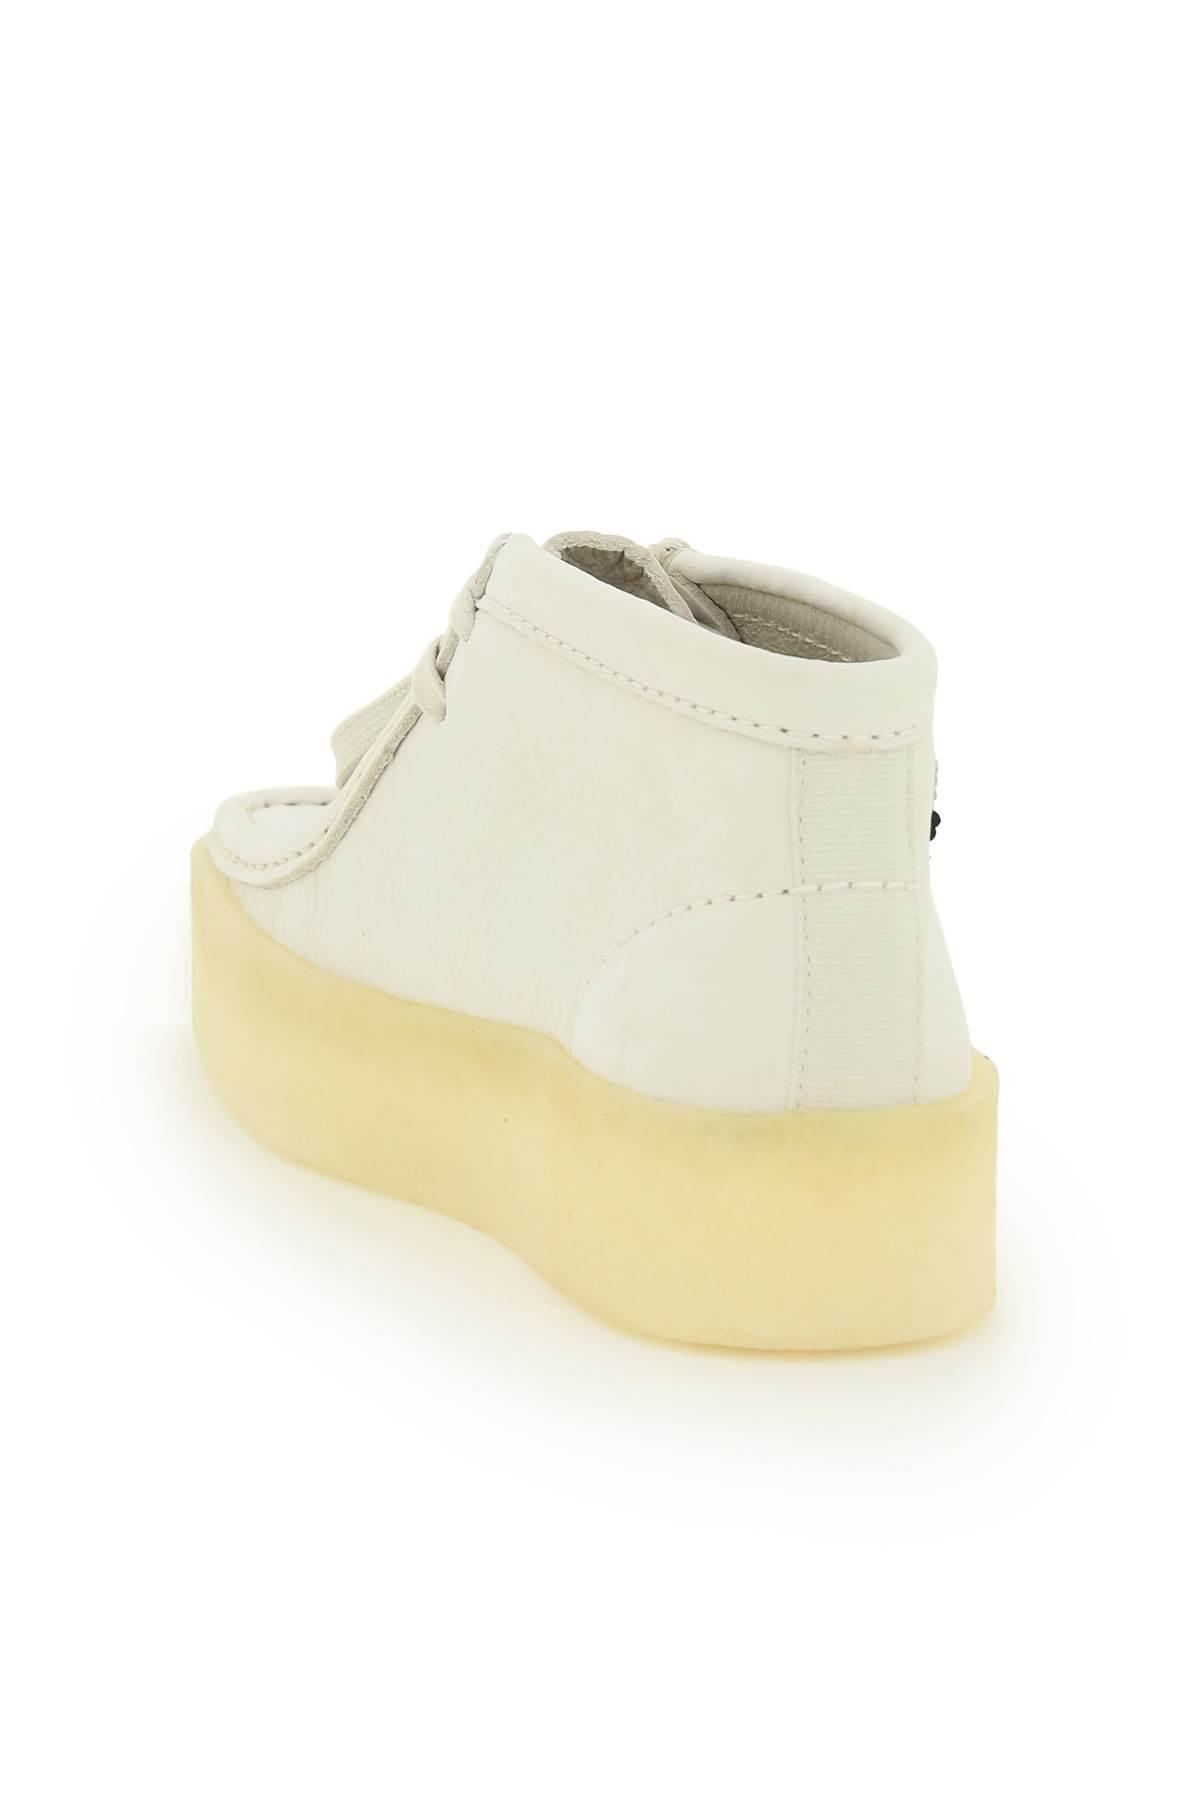 Clarks Originals Wallabee Cup Hi-top Lace-up Shoes in Metallic | Lyst